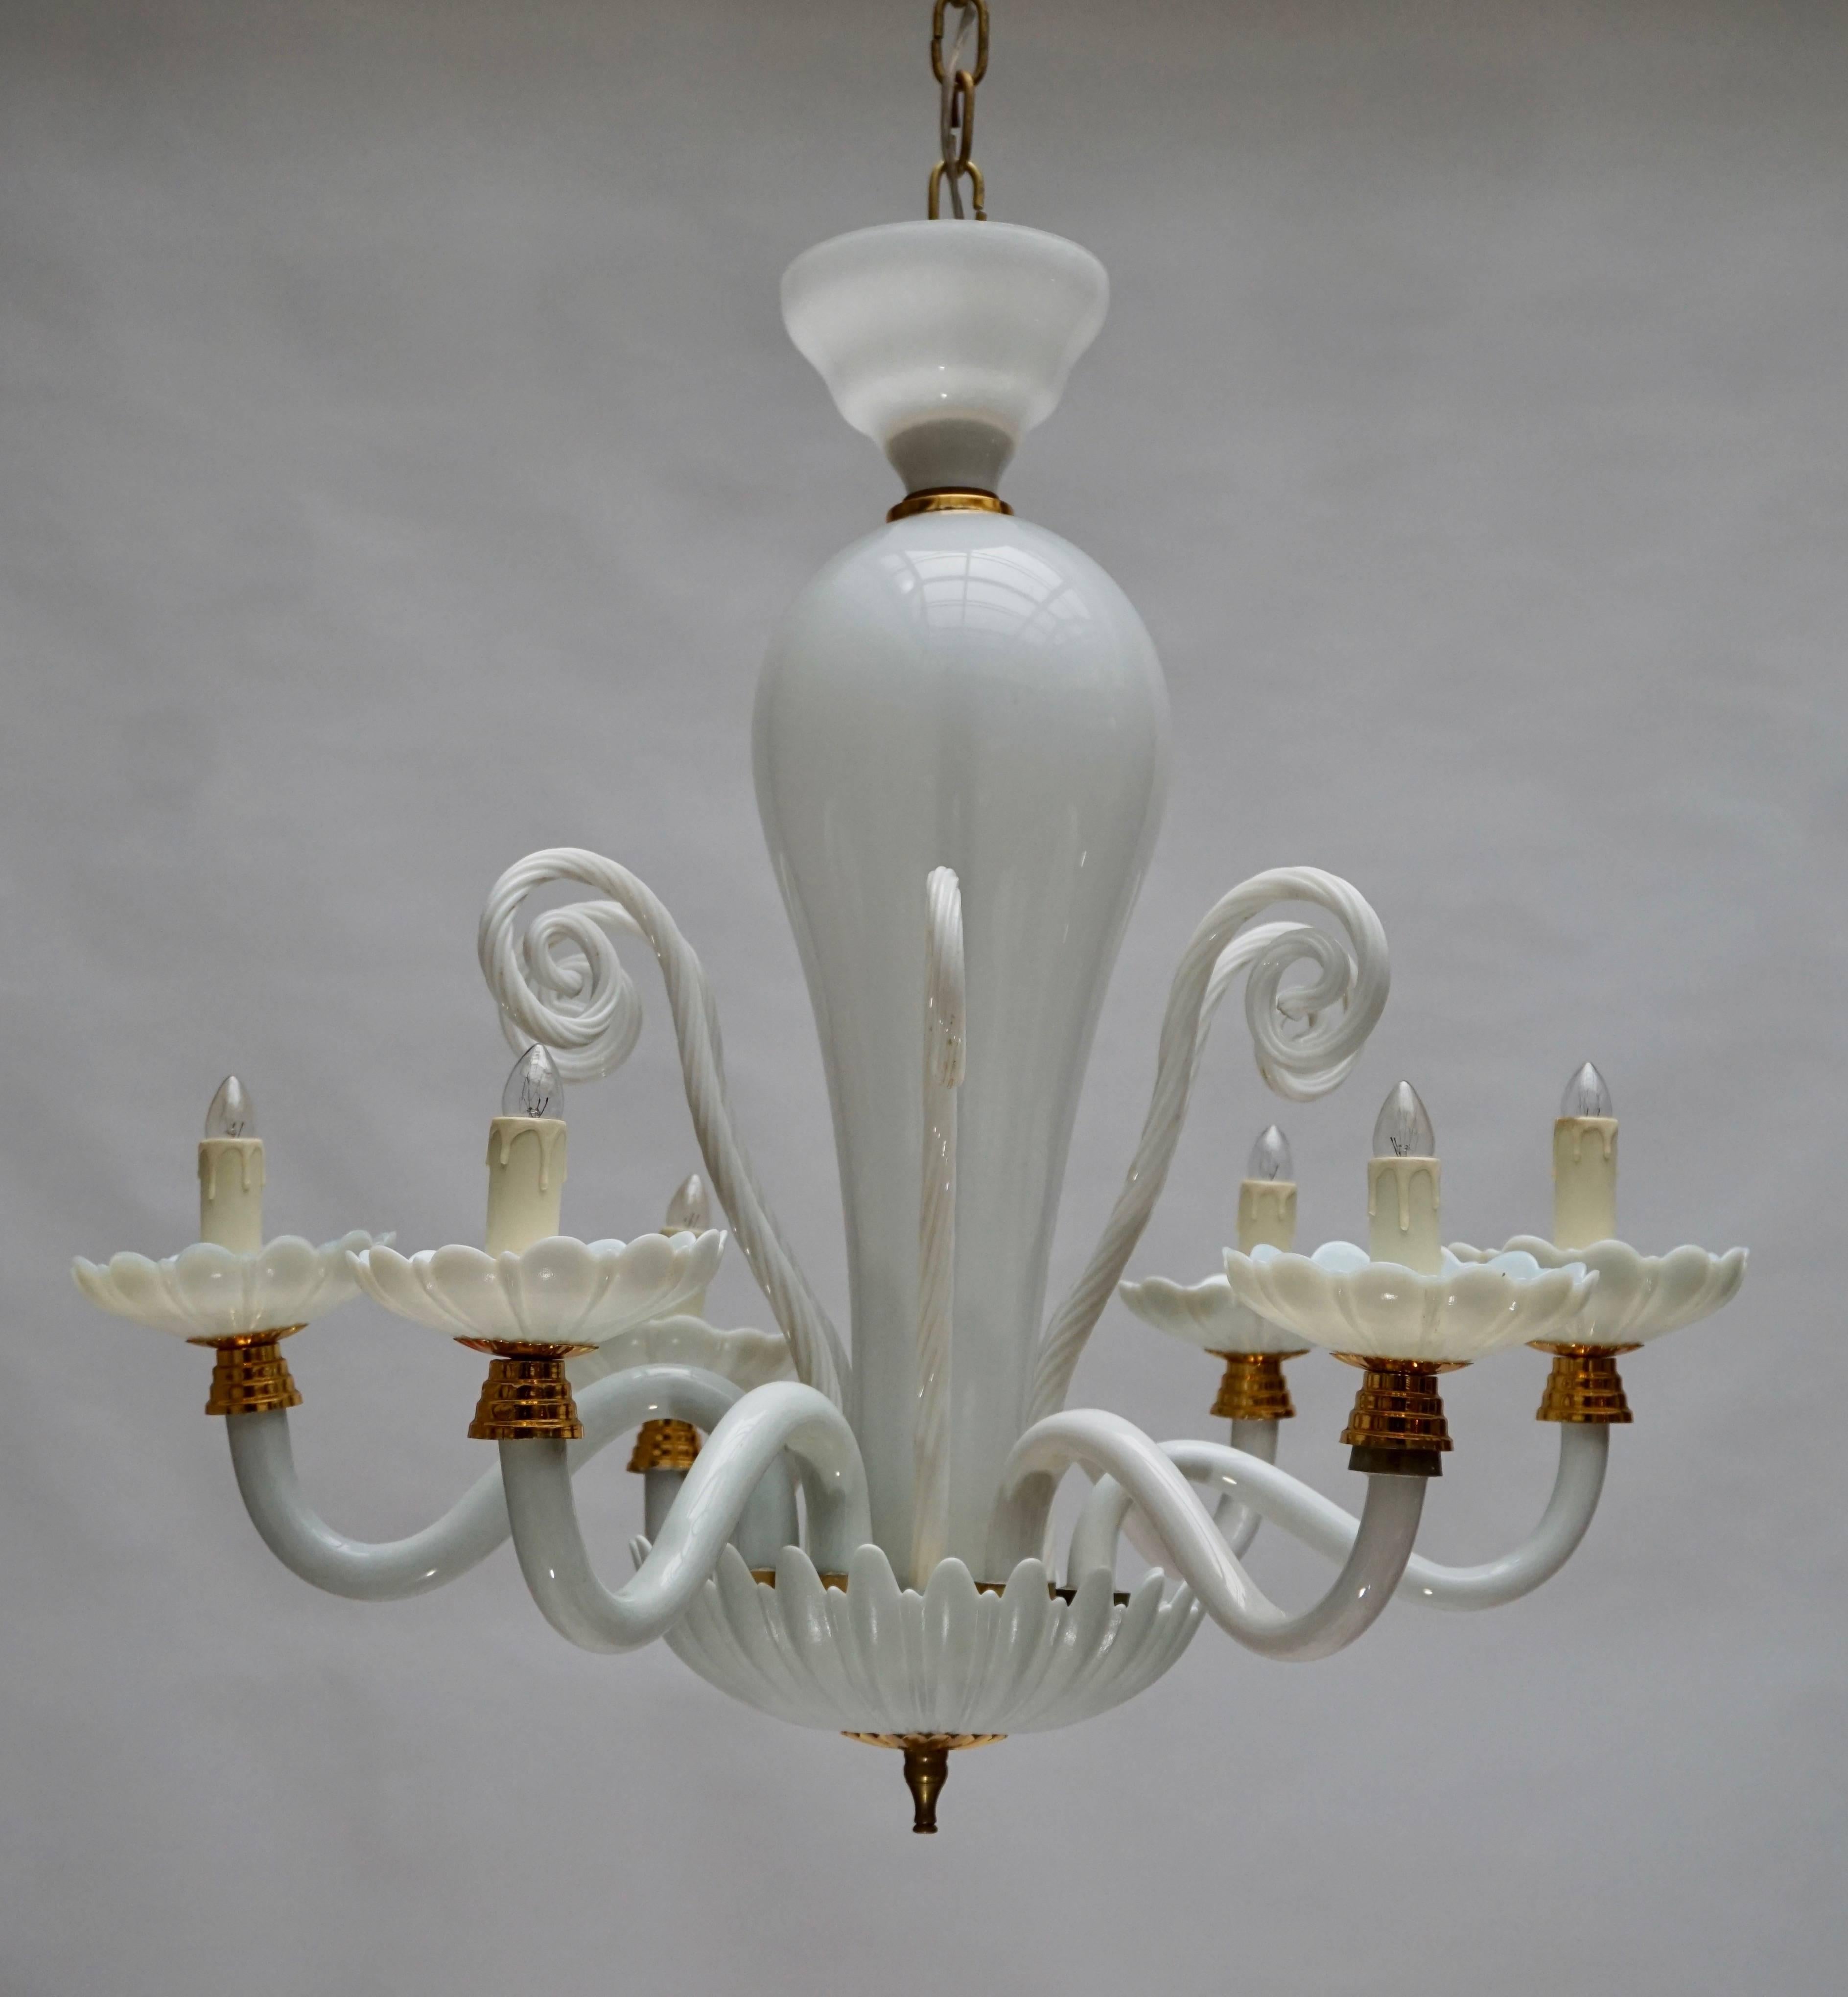 White Italian Murano glass chandelier.
Measures: Height fixture 70 cm.
Diameter 70 cm.
Total height with the chain 110 cm.
Six E14 bulbs.